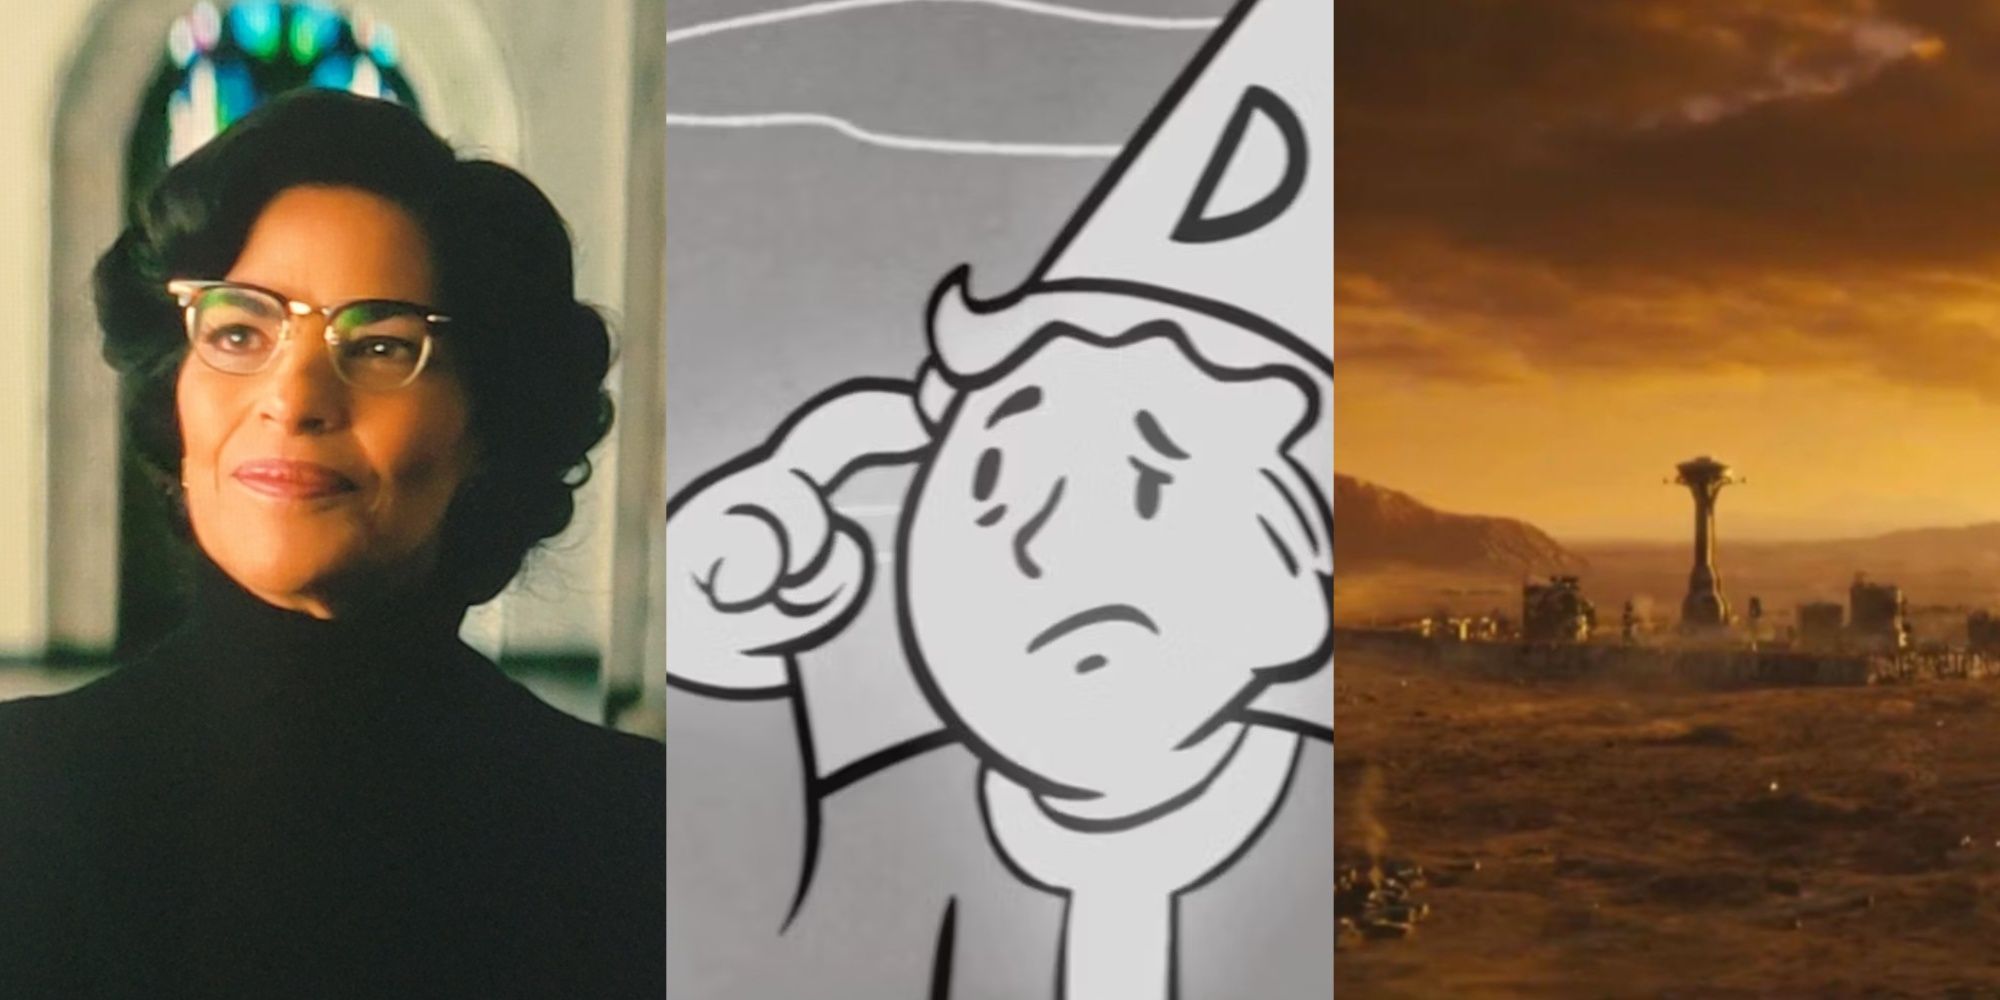 Three image collage of pre-war Lee Moldaver in Falllout, a Vault Boy in a dunce cap scratching his head, and the shot of New Vegas from the show.